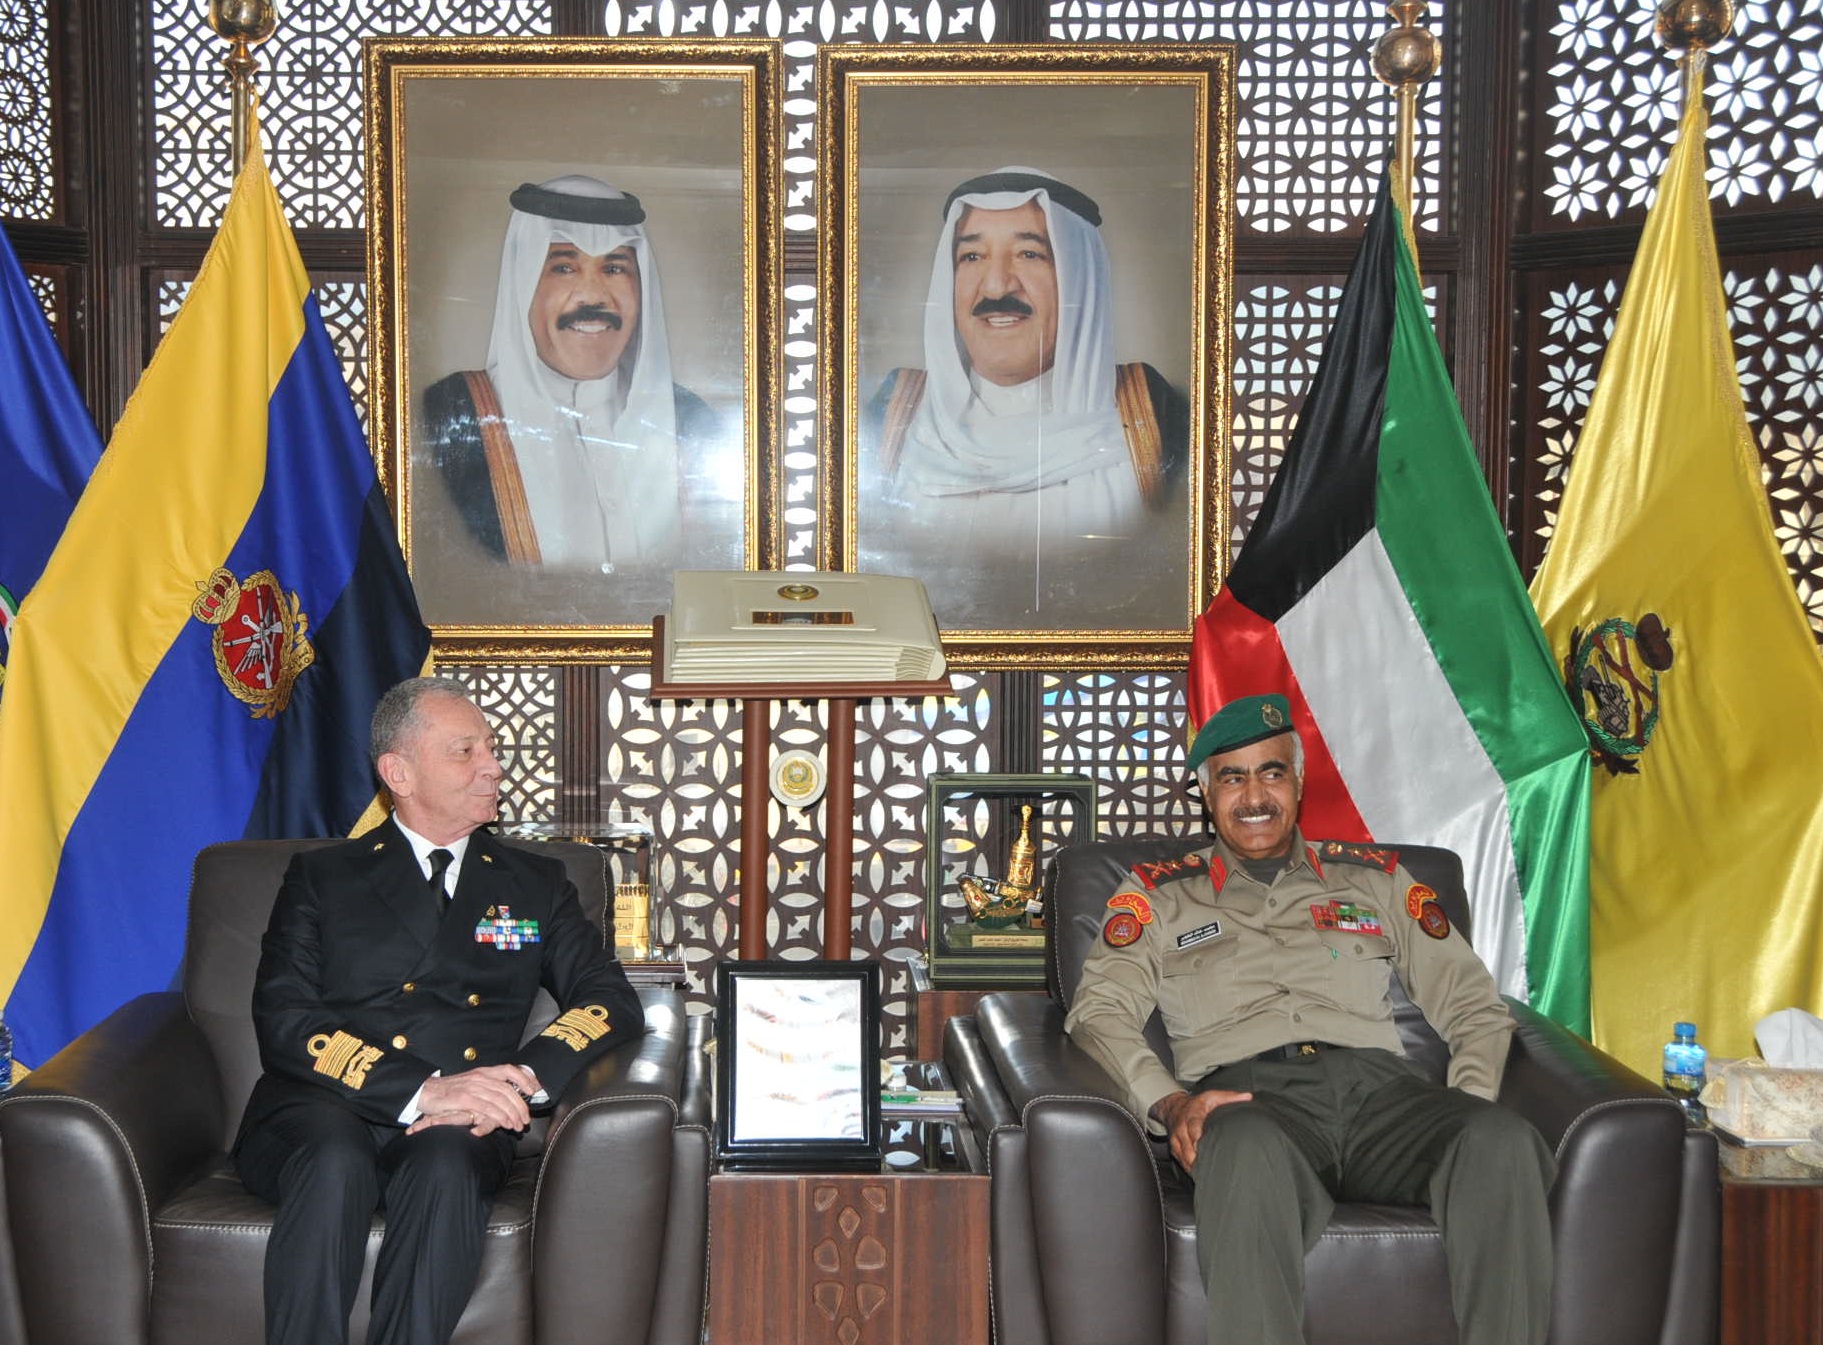 The Kuwaiti army's chief of staff Lieutenant General Mohammad Al-Khoder and Chief of Staff of the Italian Navy Vice Admiral Valter Girardelli